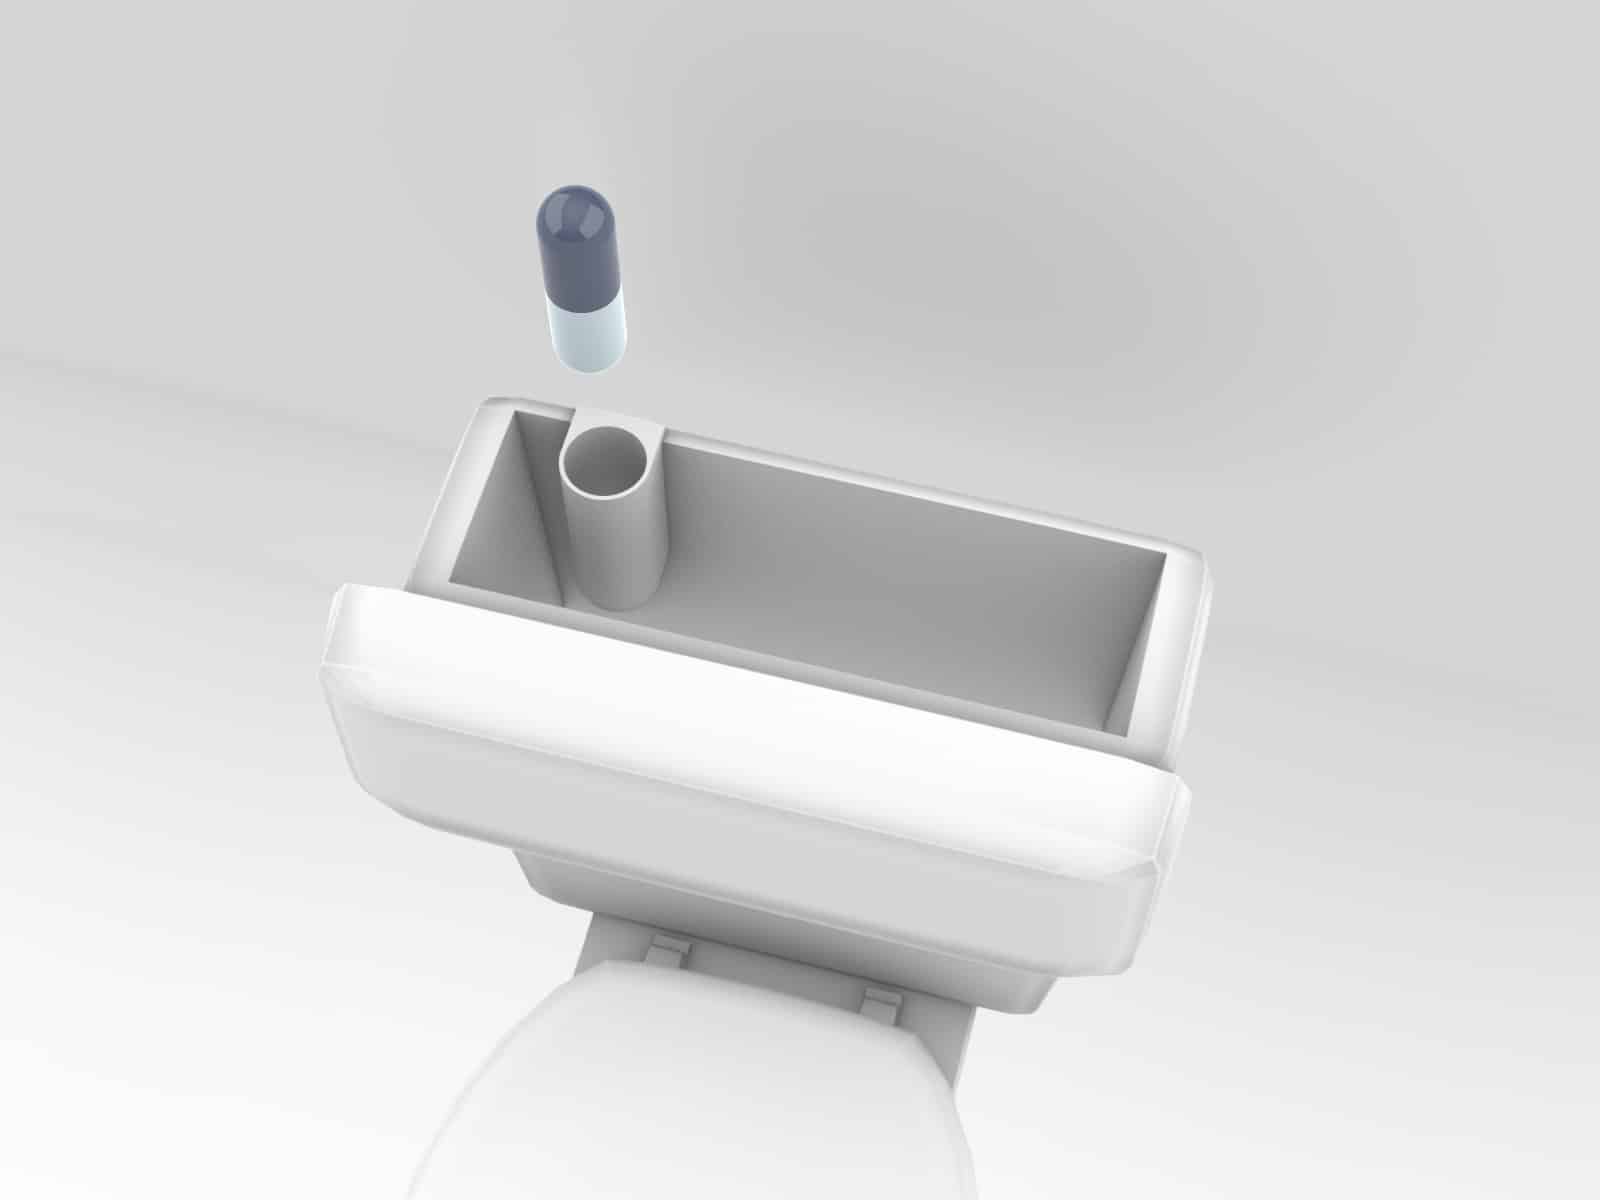 Automatic Toilet Cleaners: Searching for Good Stuff